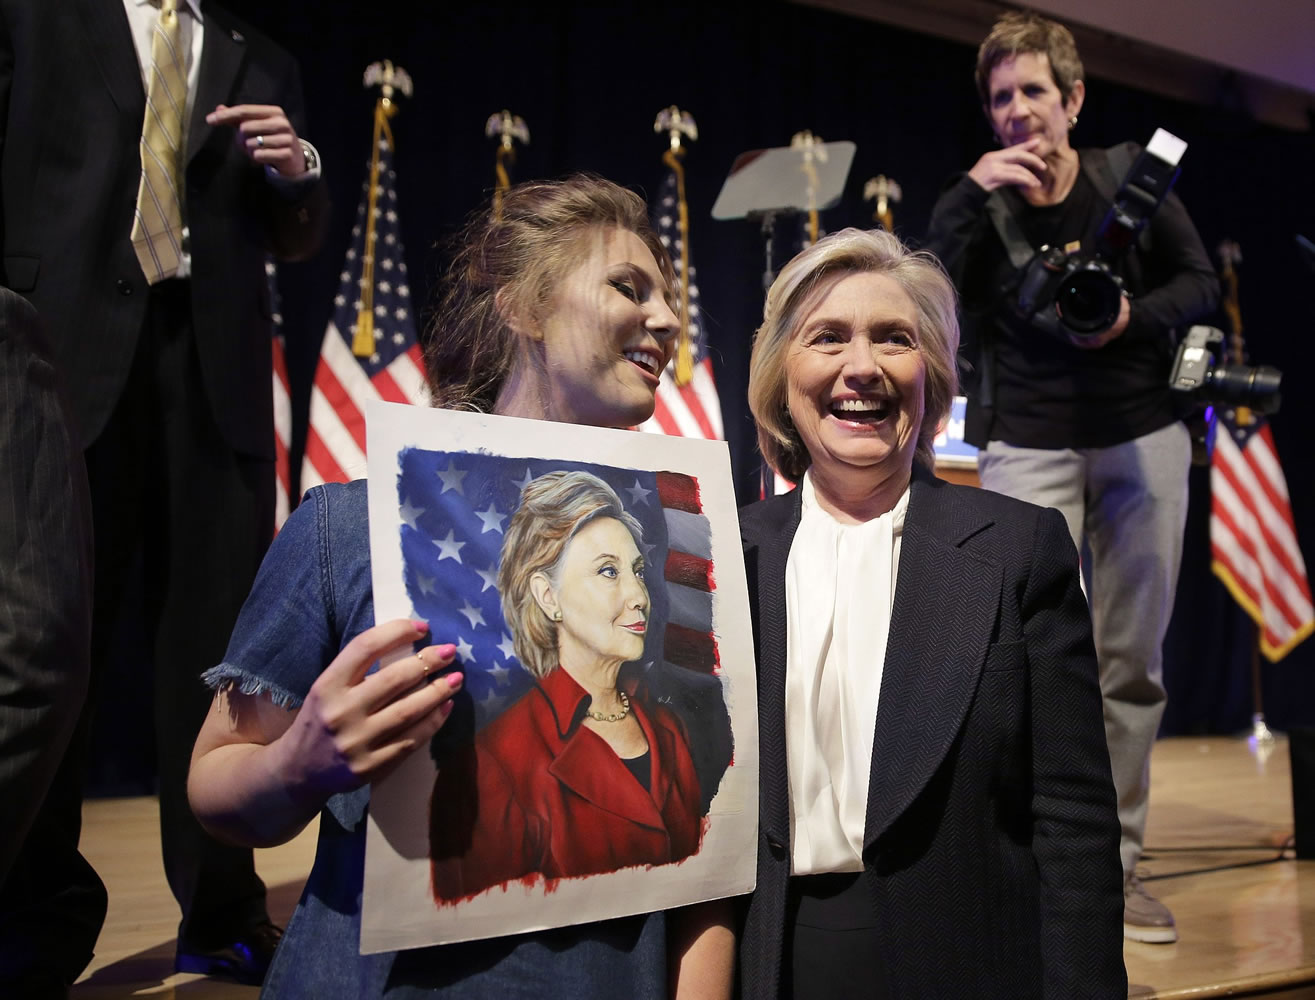 Chelsea Galinos, 21, left, who painted a picture of the democratic presidential candidate Hillary Rodham Clinton, greets Clinton after a campaign event in New York on Monday.